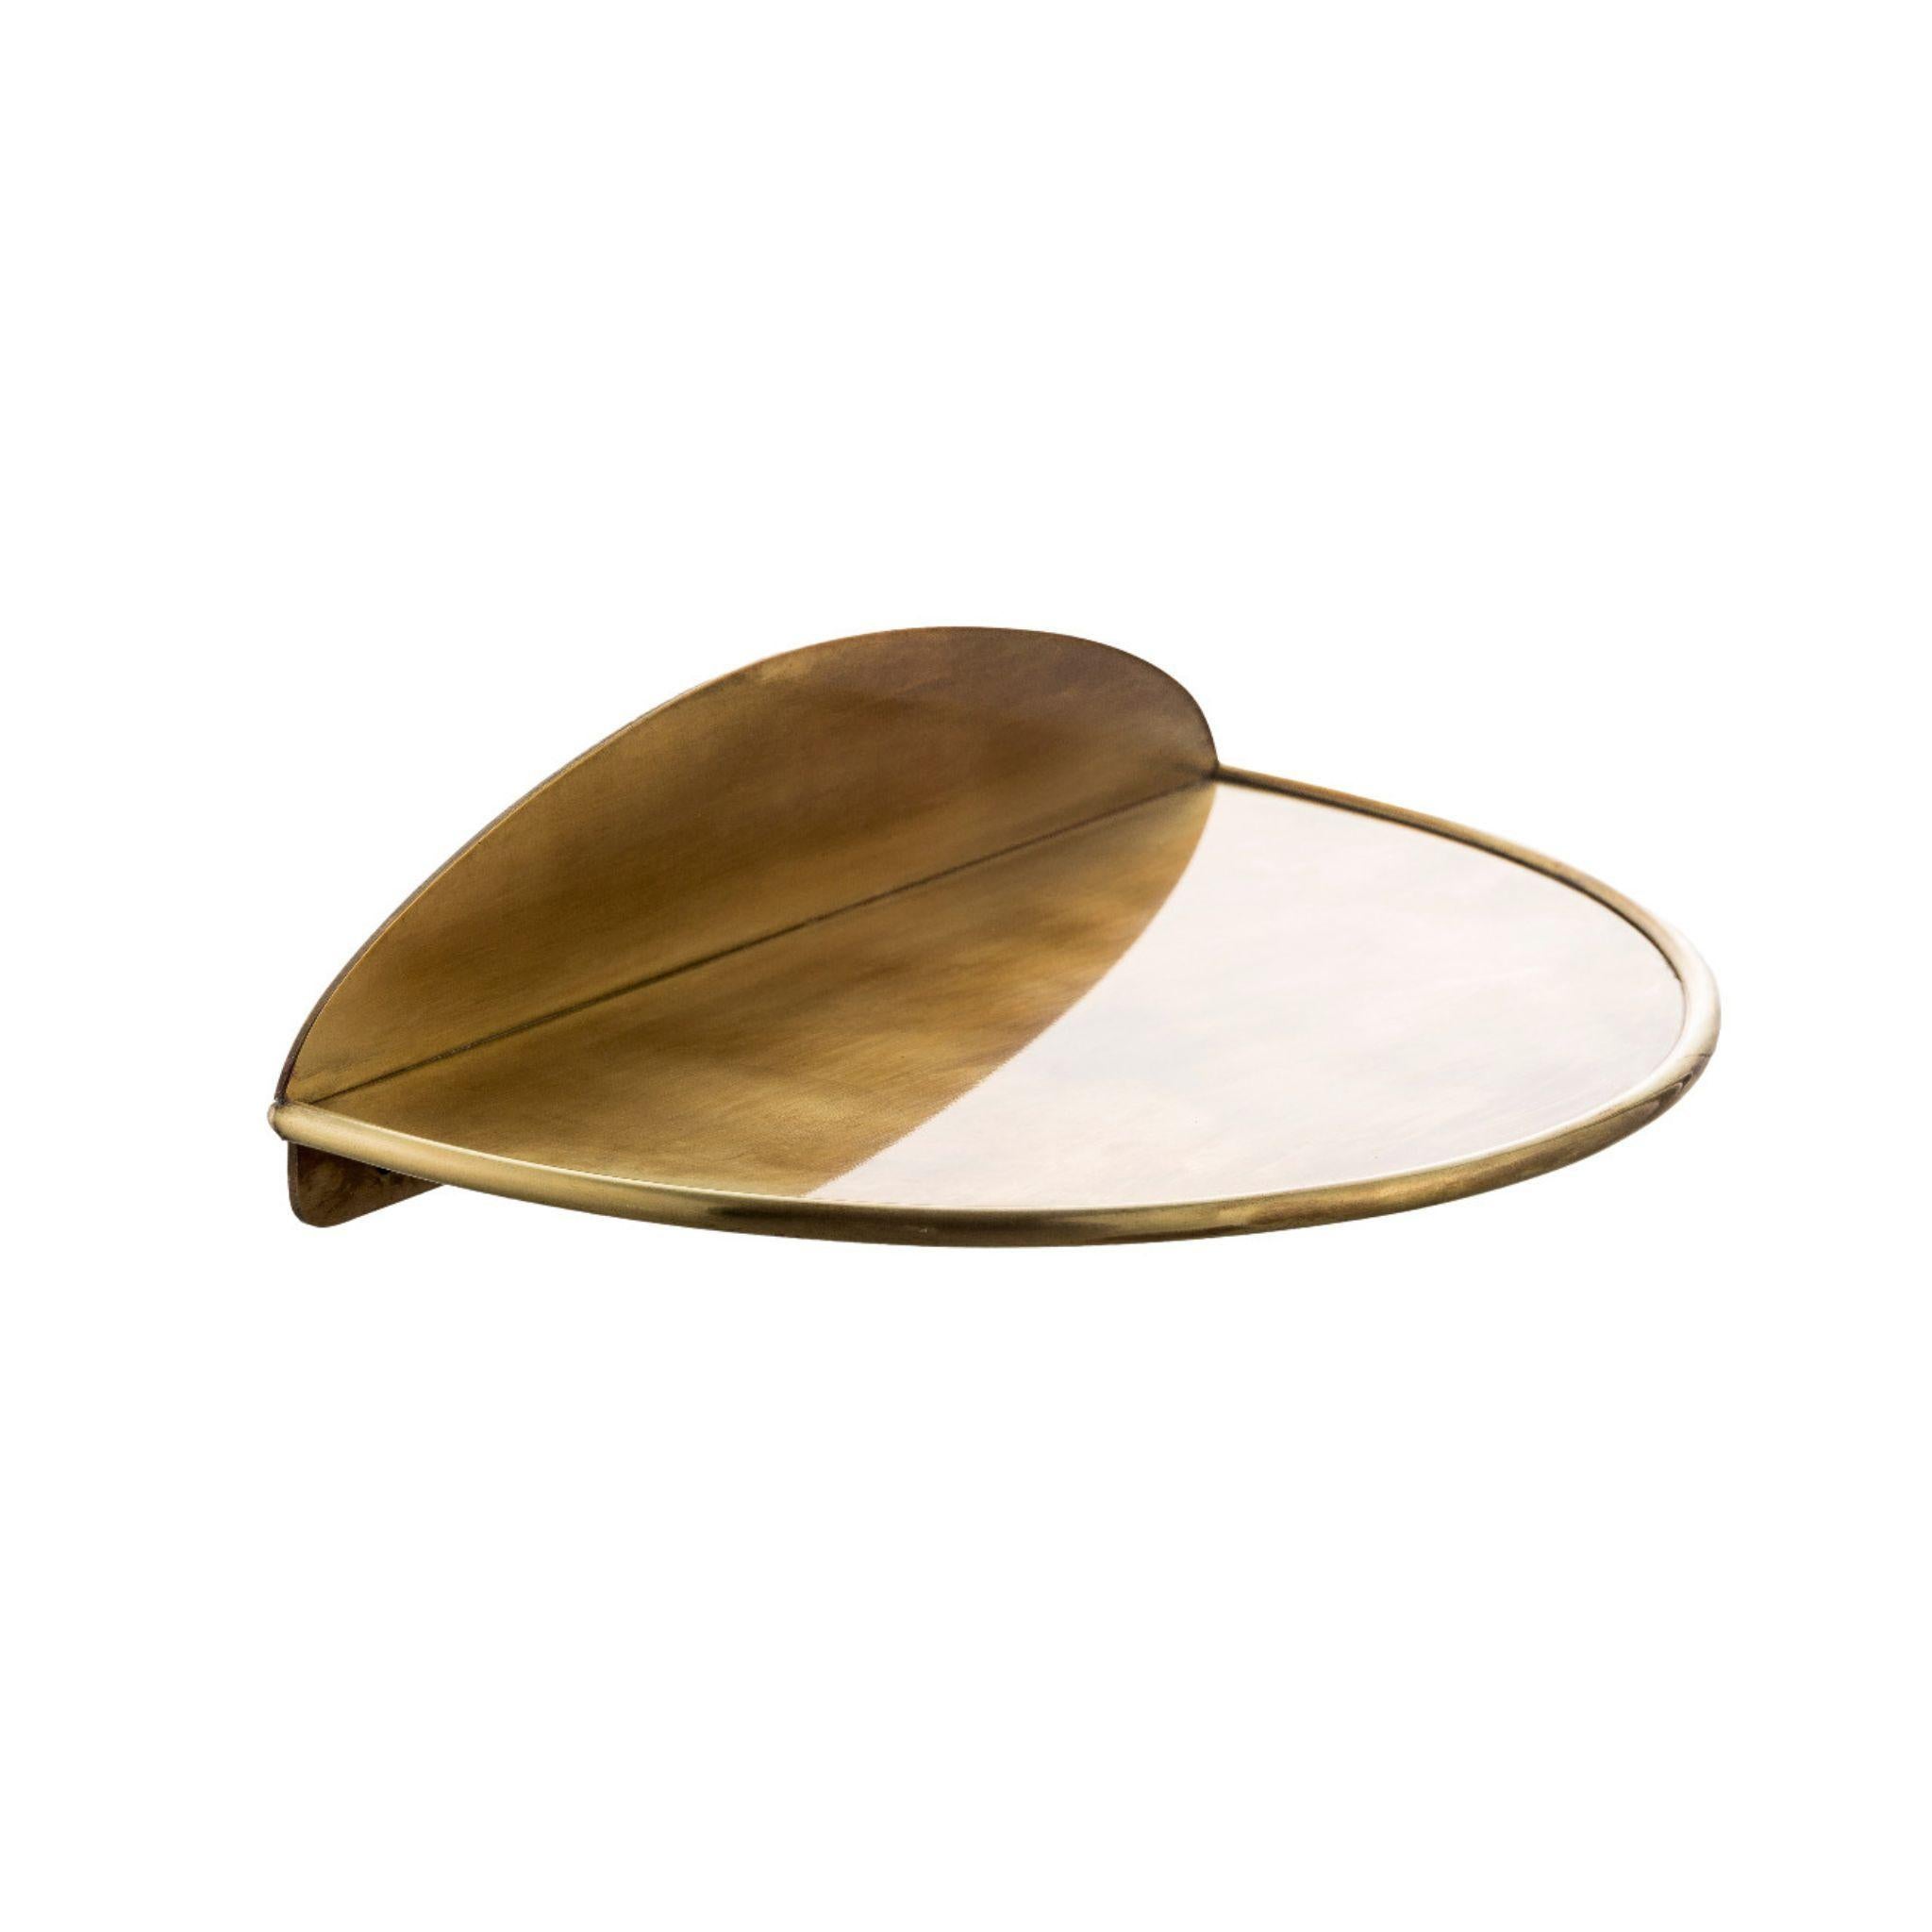 This beautifully crafted brass shelf is available in two stunning finishes: natural brass or dark burnish brass. The sleek and simple design makes it a versatile addition to any room, while the high-quality materials ensure it will stand the test of